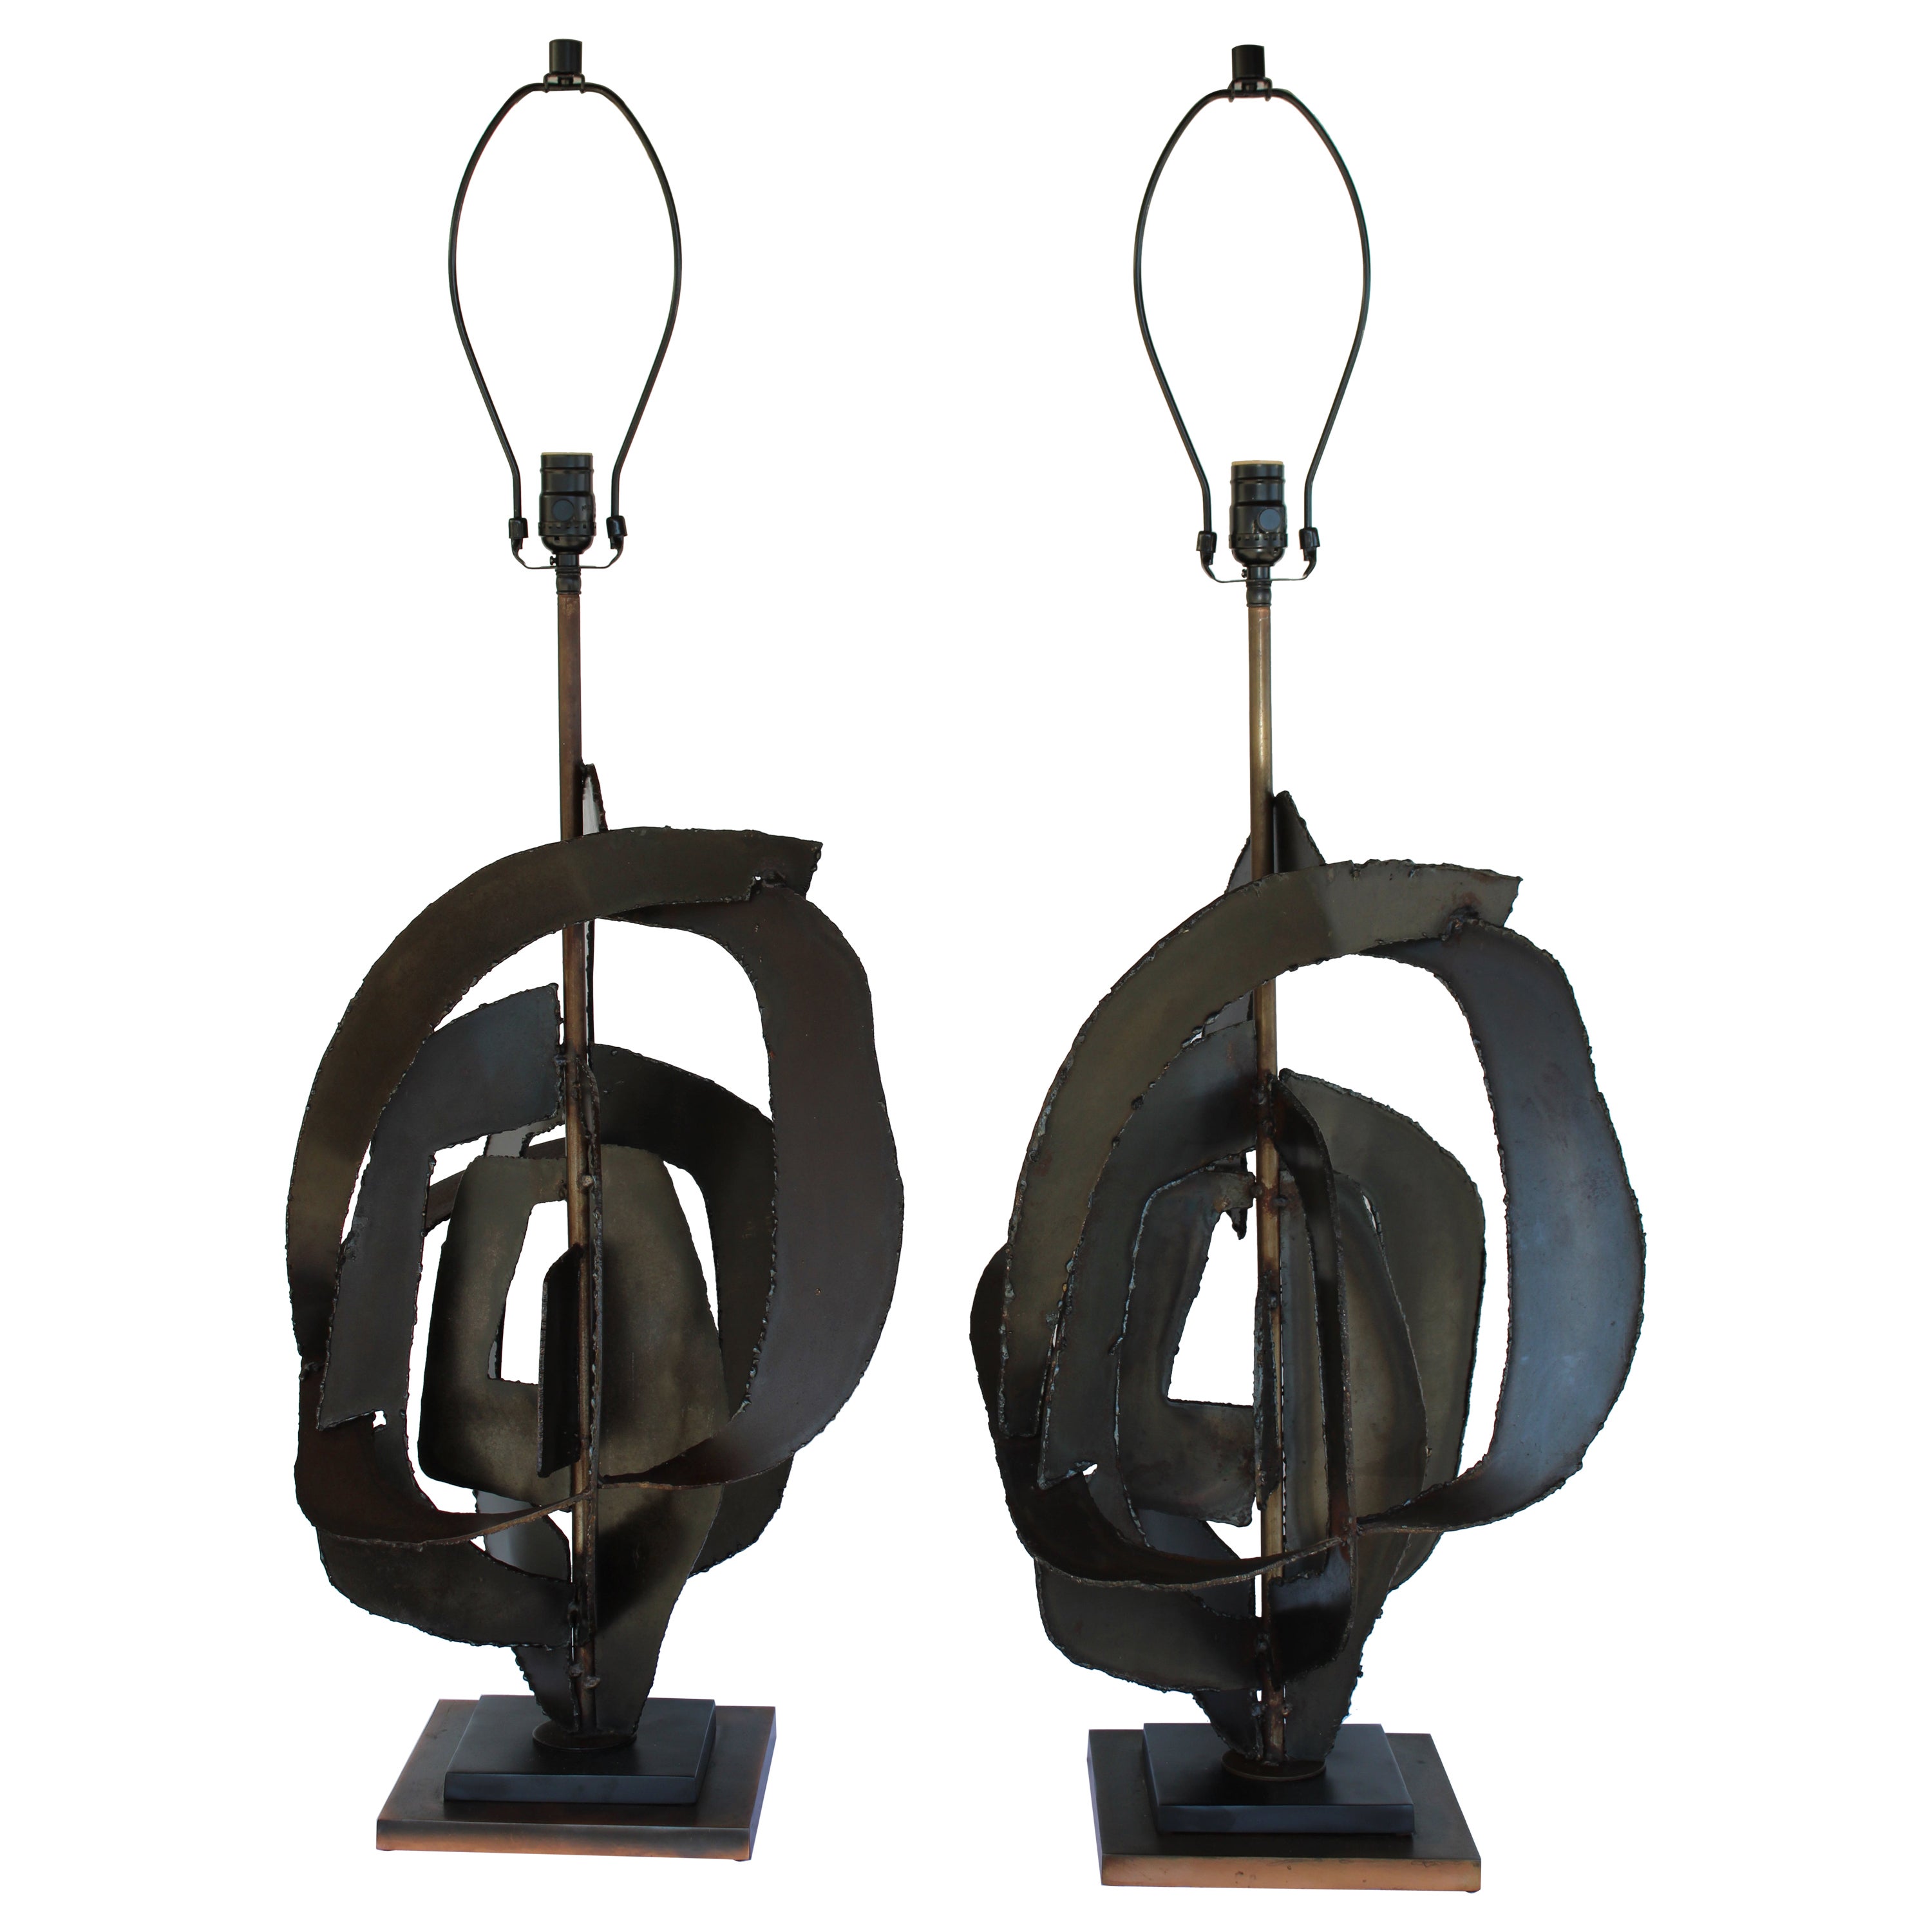 Pair of Brutalist Lamps by Richard Barr for the Laurel Lamp Co.